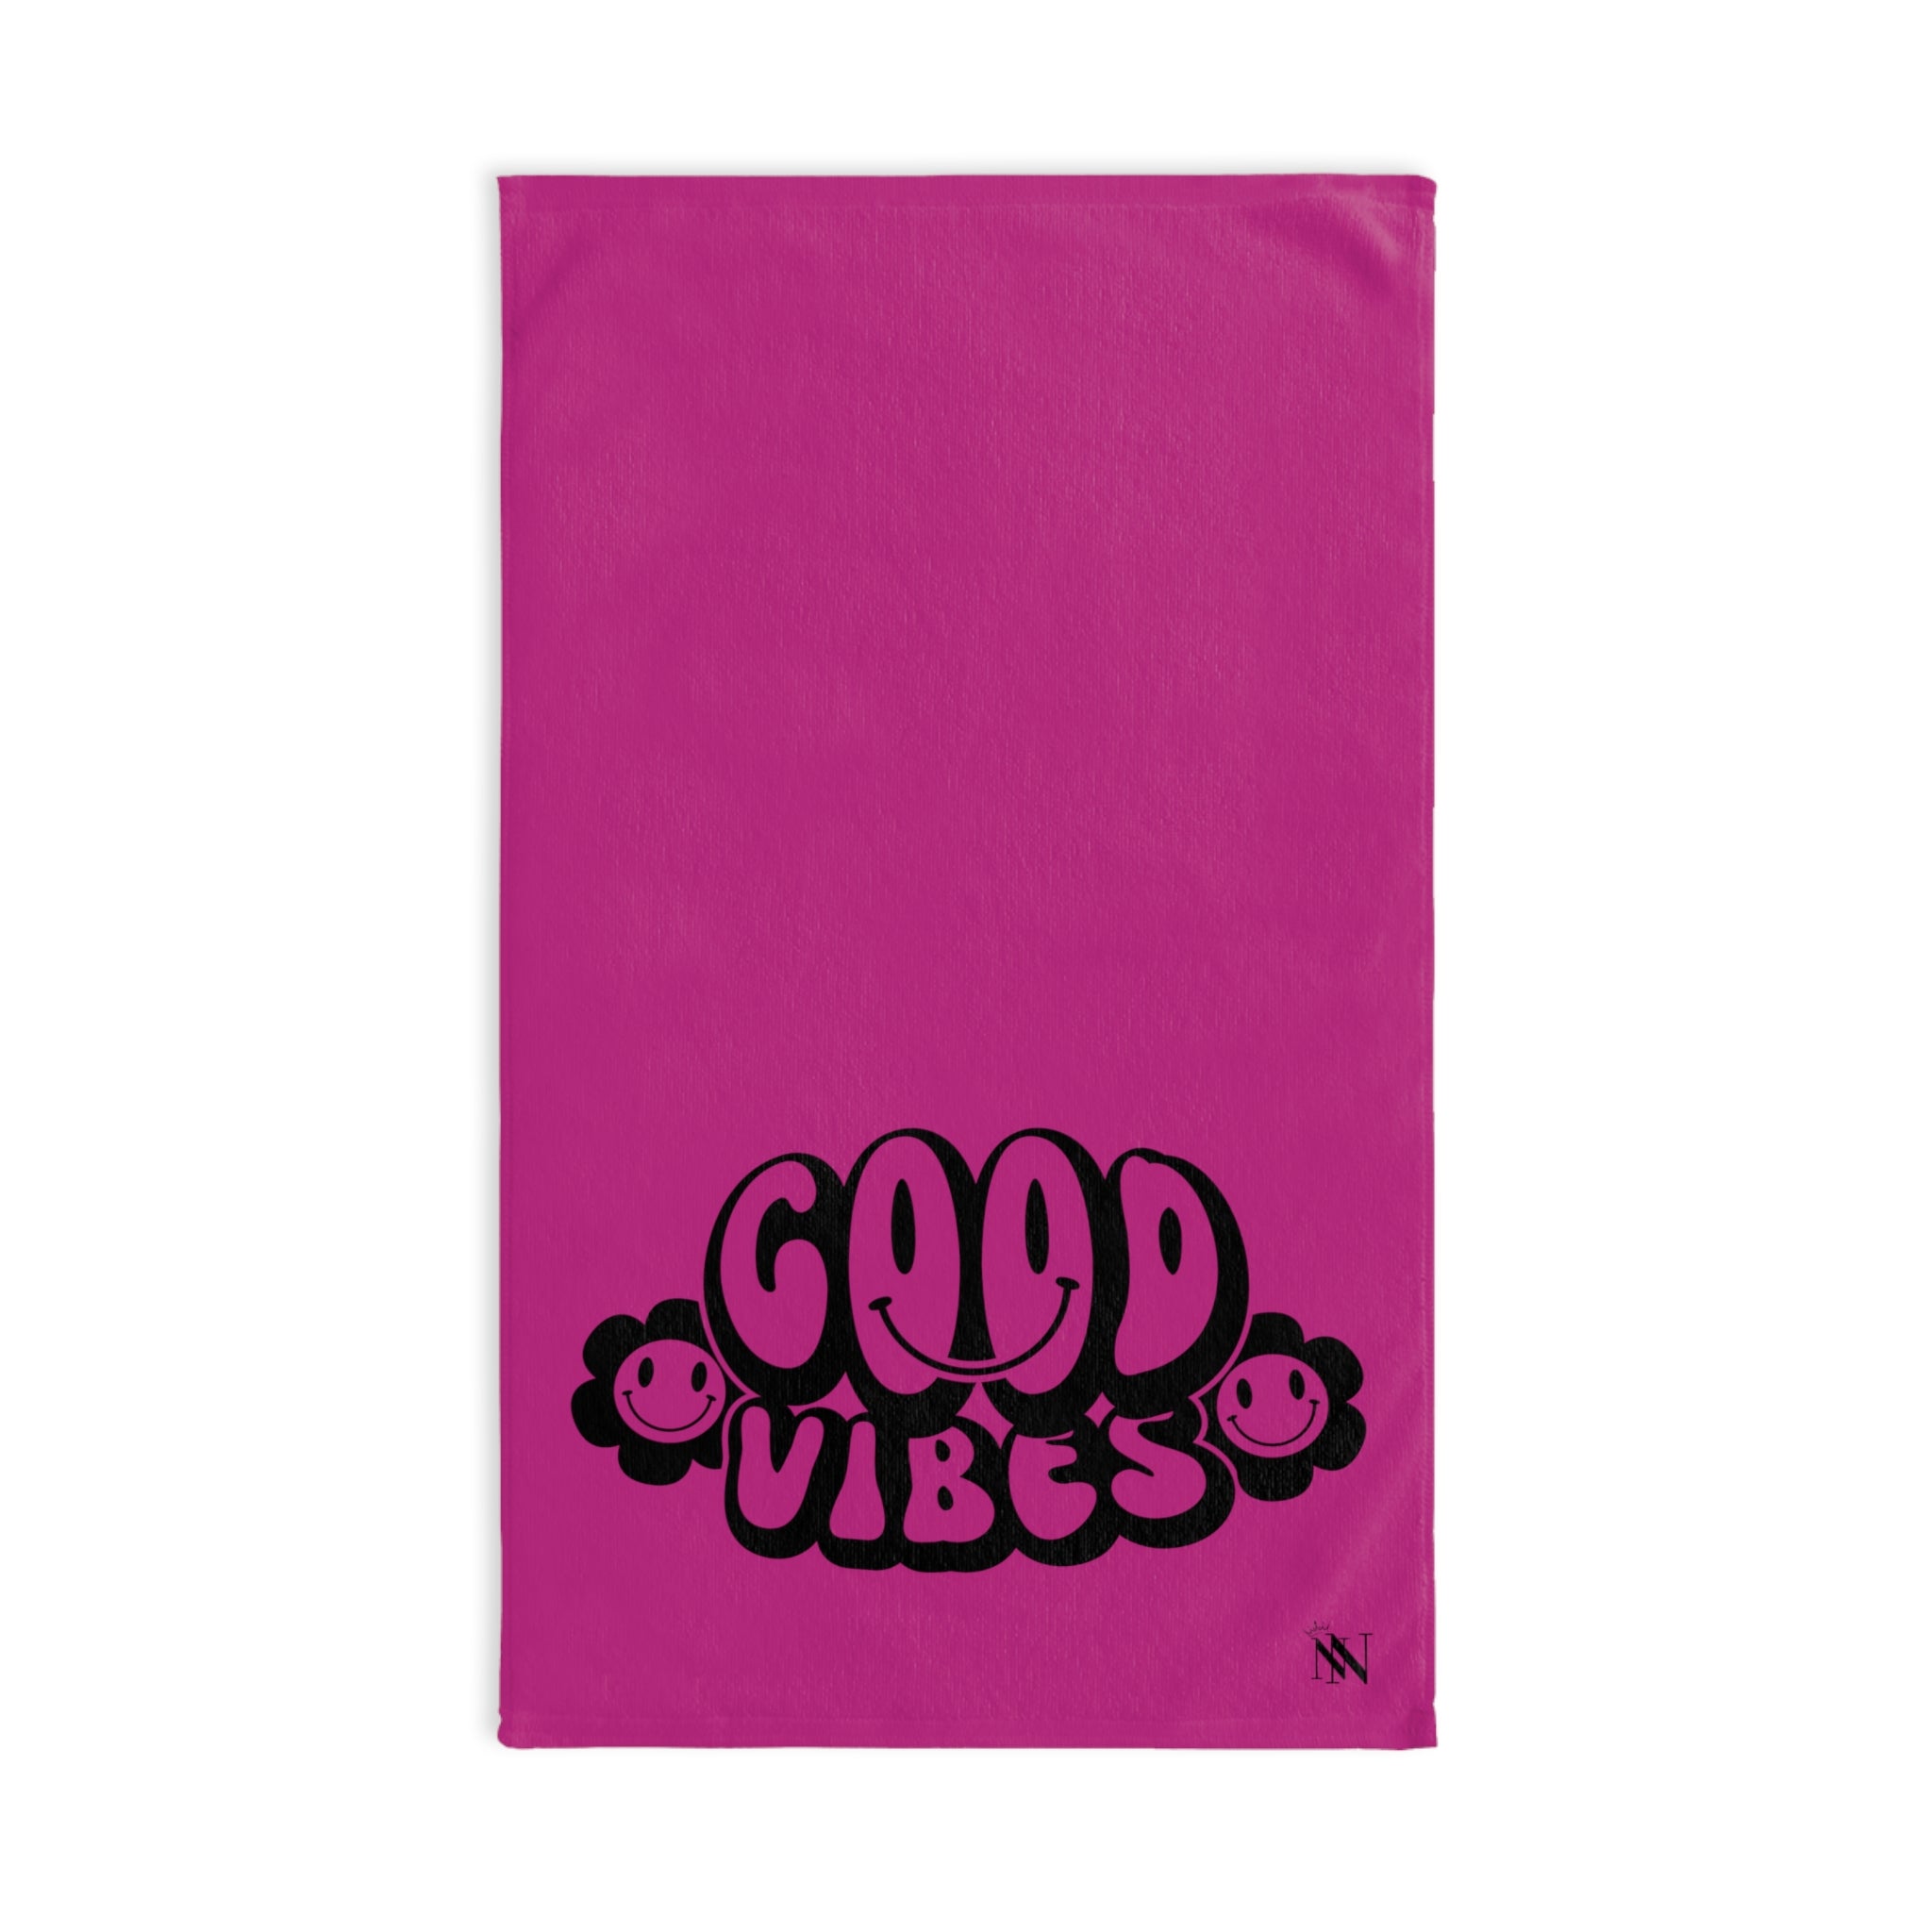 Smile Good Black  Fuscia | Funny Gifts for Men - Gifts for Him - Birthday Gifts for Men, Him, Husband, Boyfriend, New Couple Gifts, Fathers & Valentines Day Gifts, Hand Towels NECTAR NAPKINS